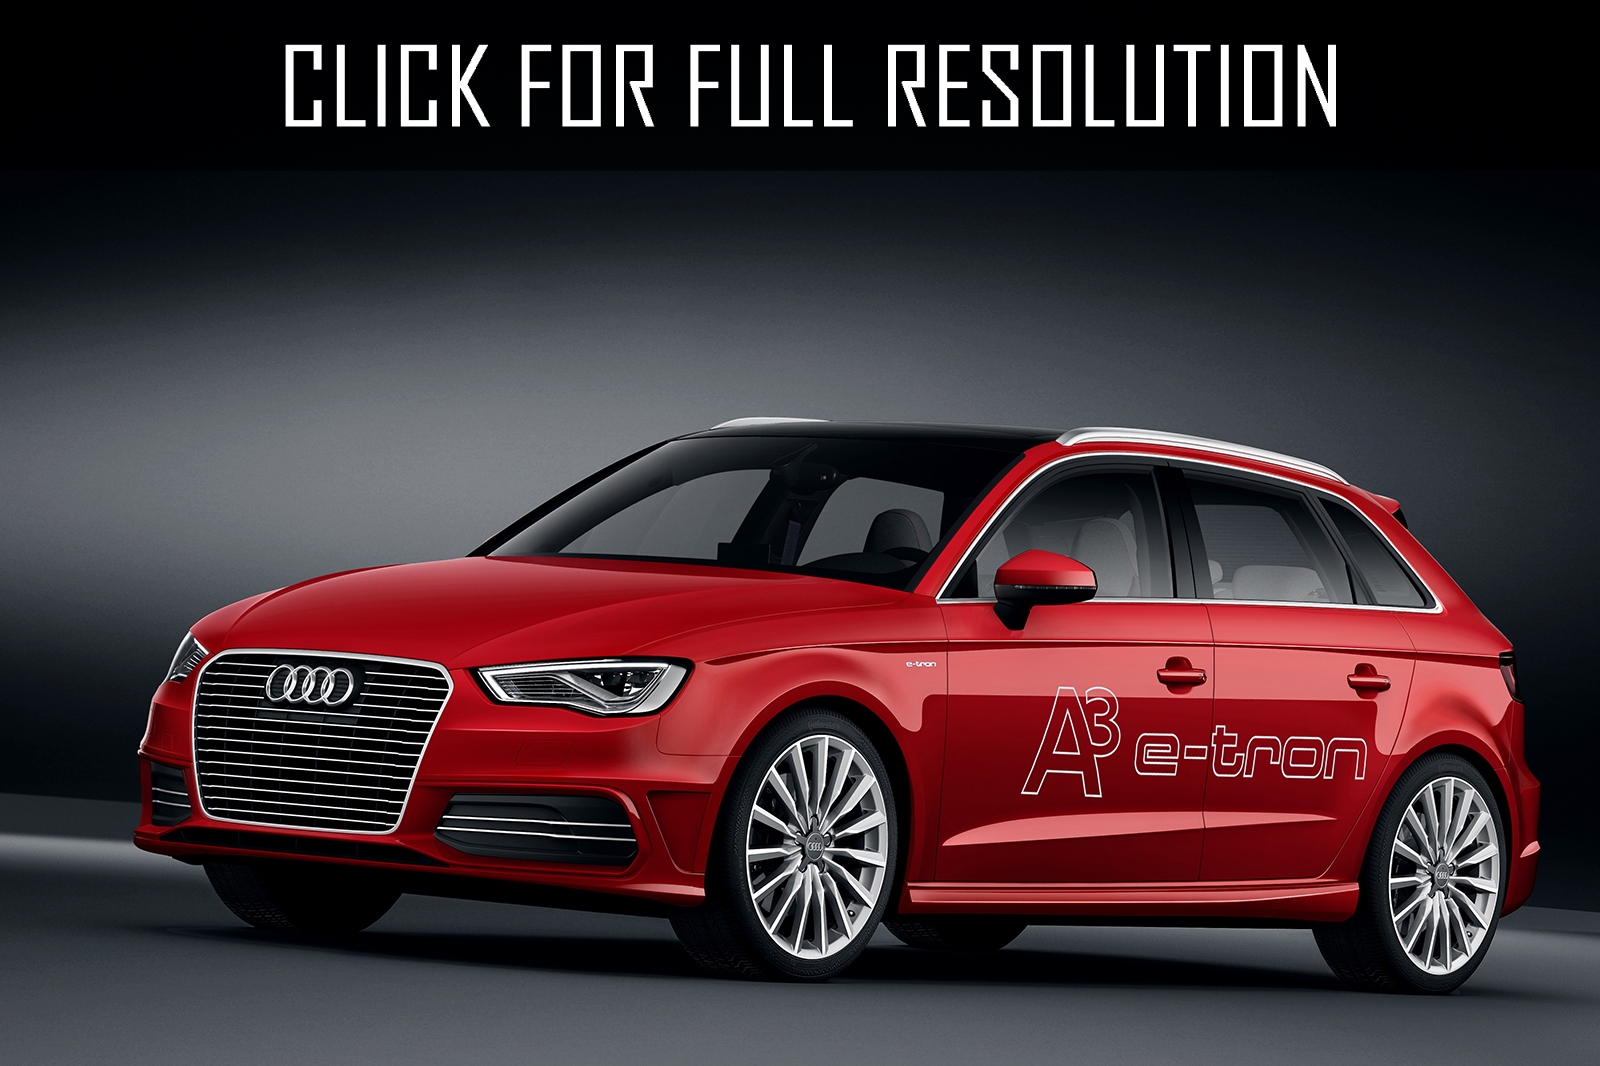 Audi A4 Hybrid amazing photo gallery, some information and